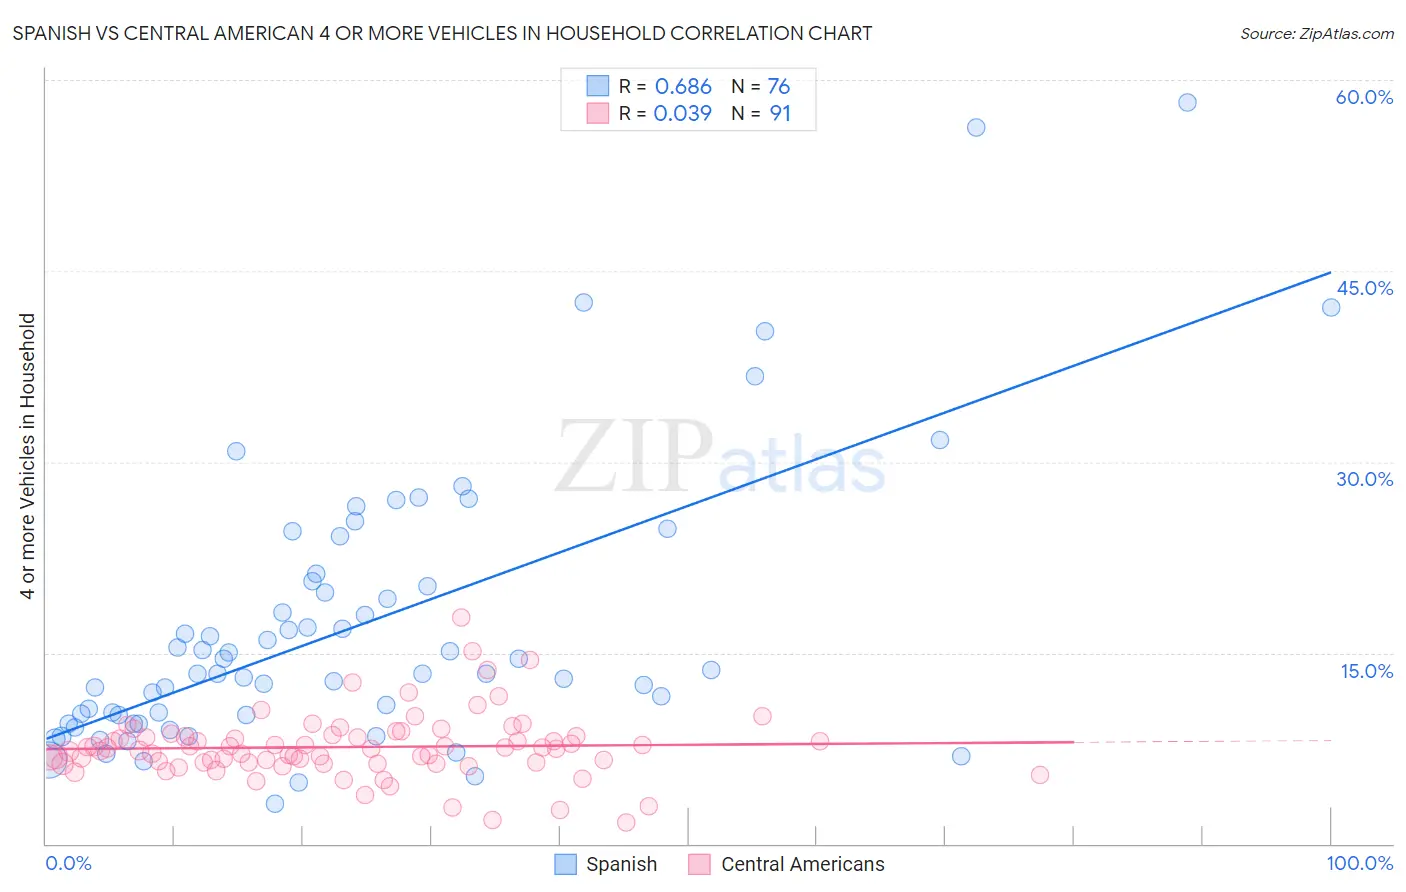 Spanish vs Central American 4 or more Vehicles in Household